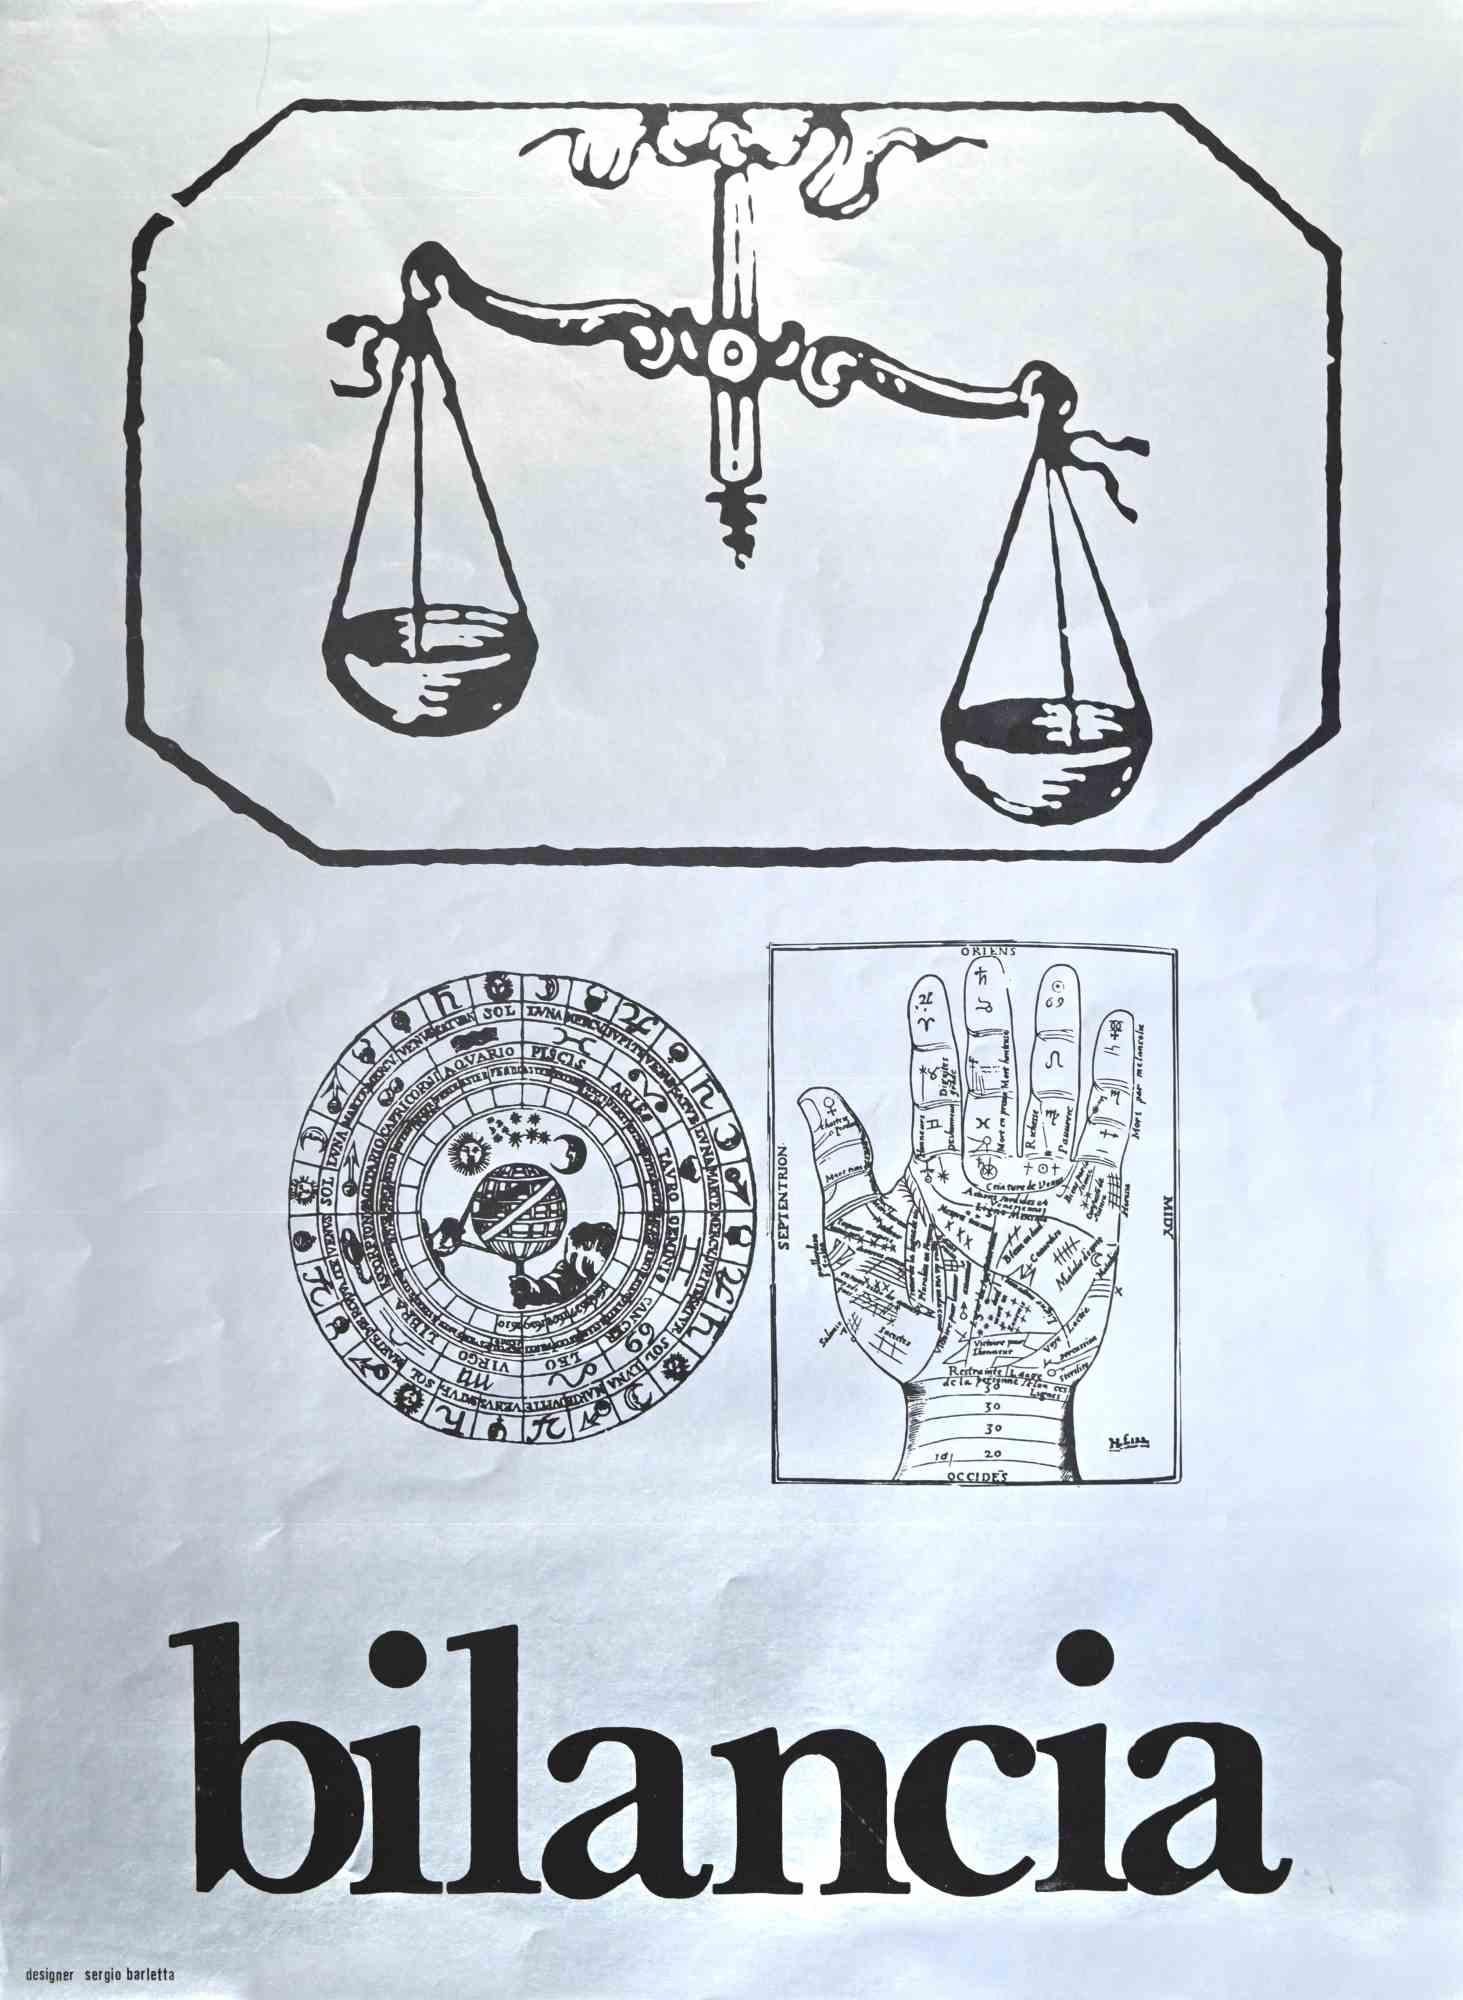 Libra is a vintage poster on silvery paper realized by Sergio Barletta.

In good conditions

The artwork represents the zodiac sign.

Sergio Barletta  (1934) is an Italian cartoonist and illustrator, who has also published some humorous and